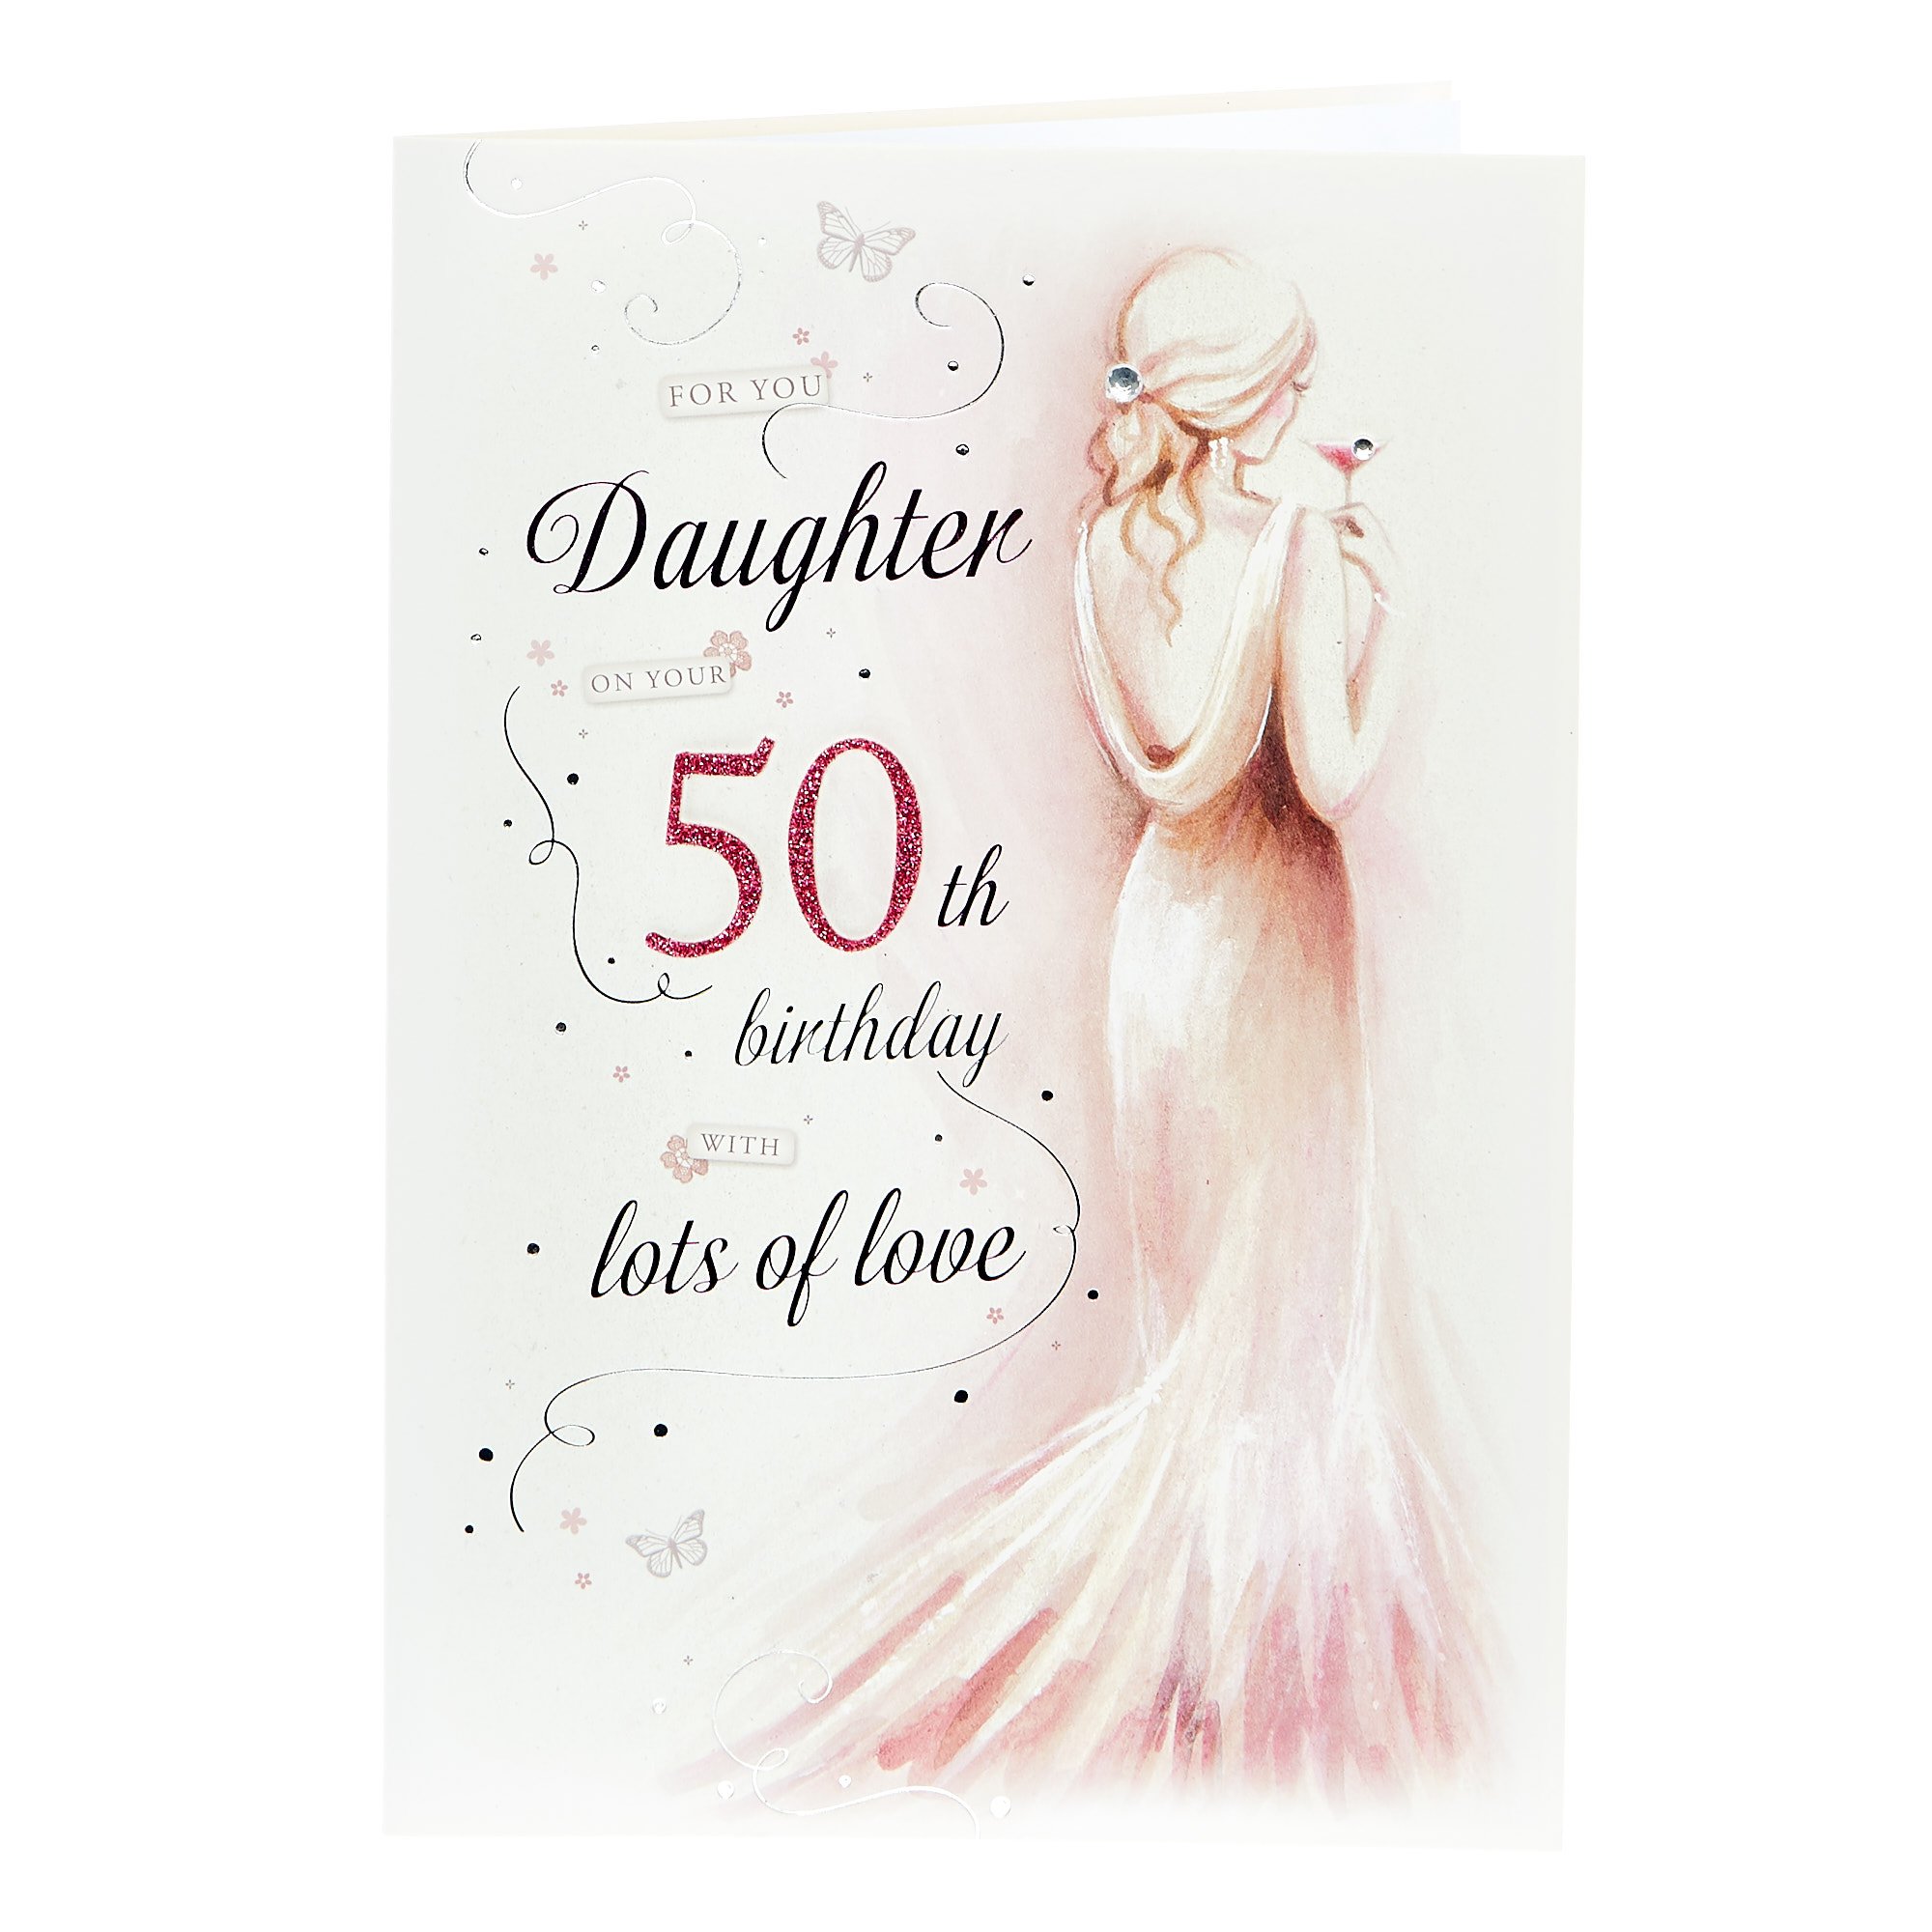 Buy 50th Birthday Card - Daughter, With Lots Of Love for GBP 1.29 ...